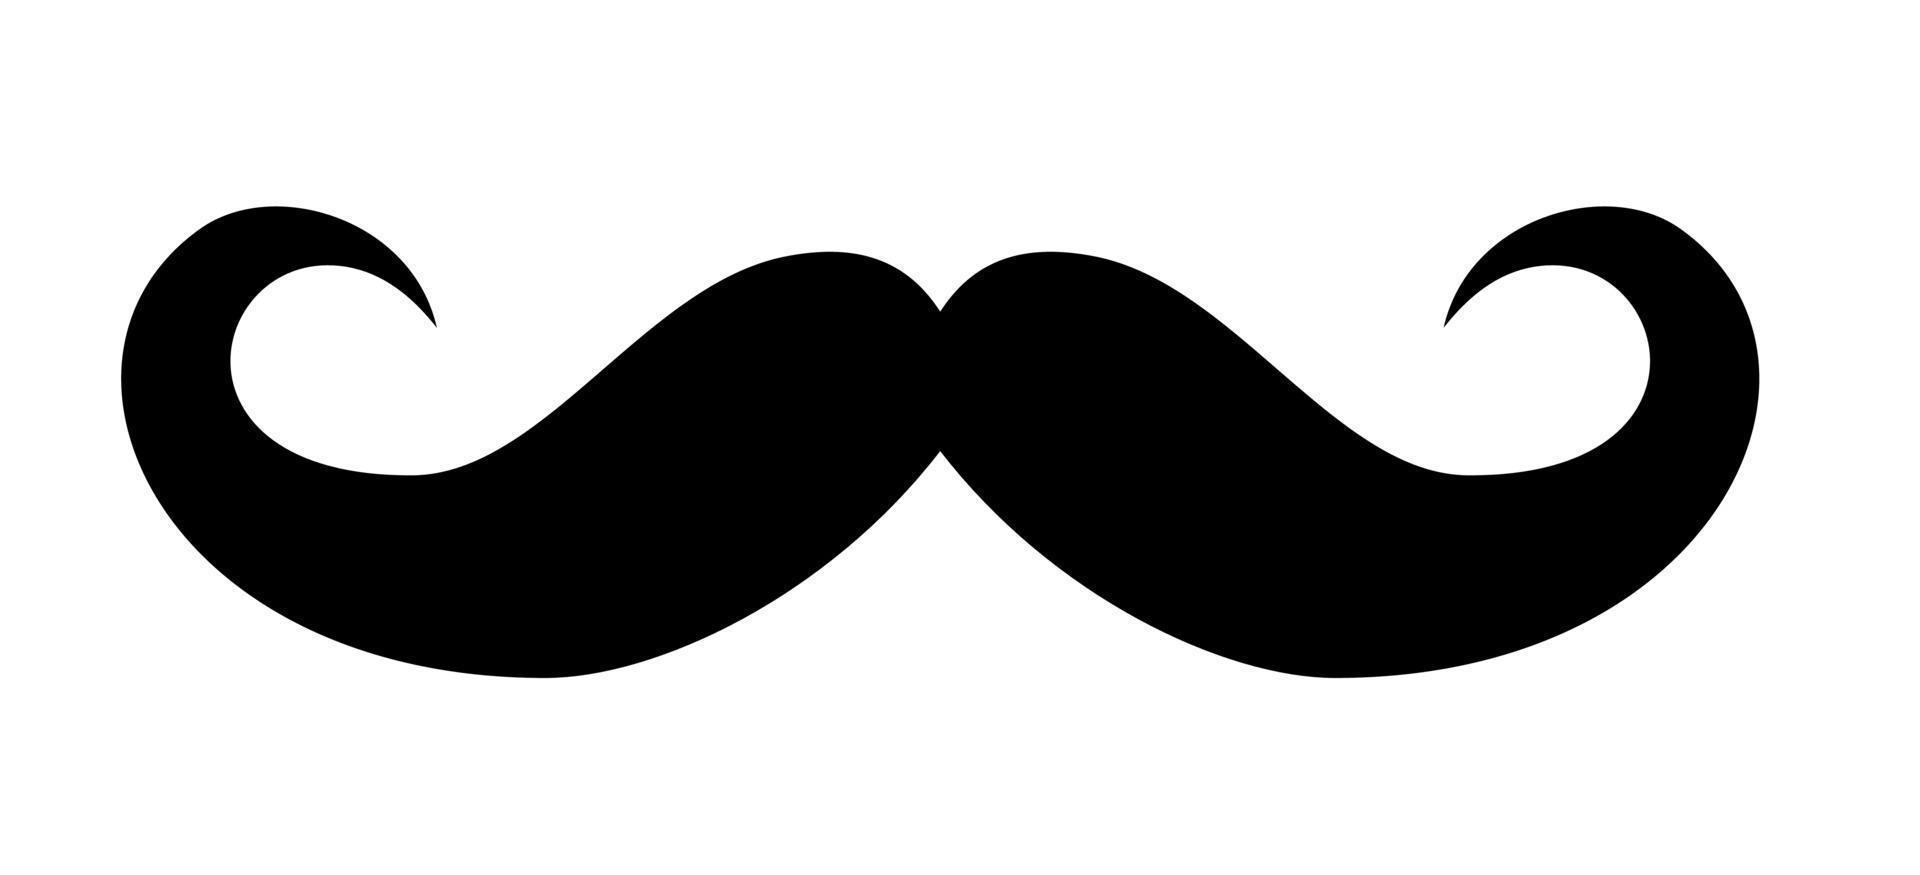 Dad's mustache collection. Vector Illustration. EPS10